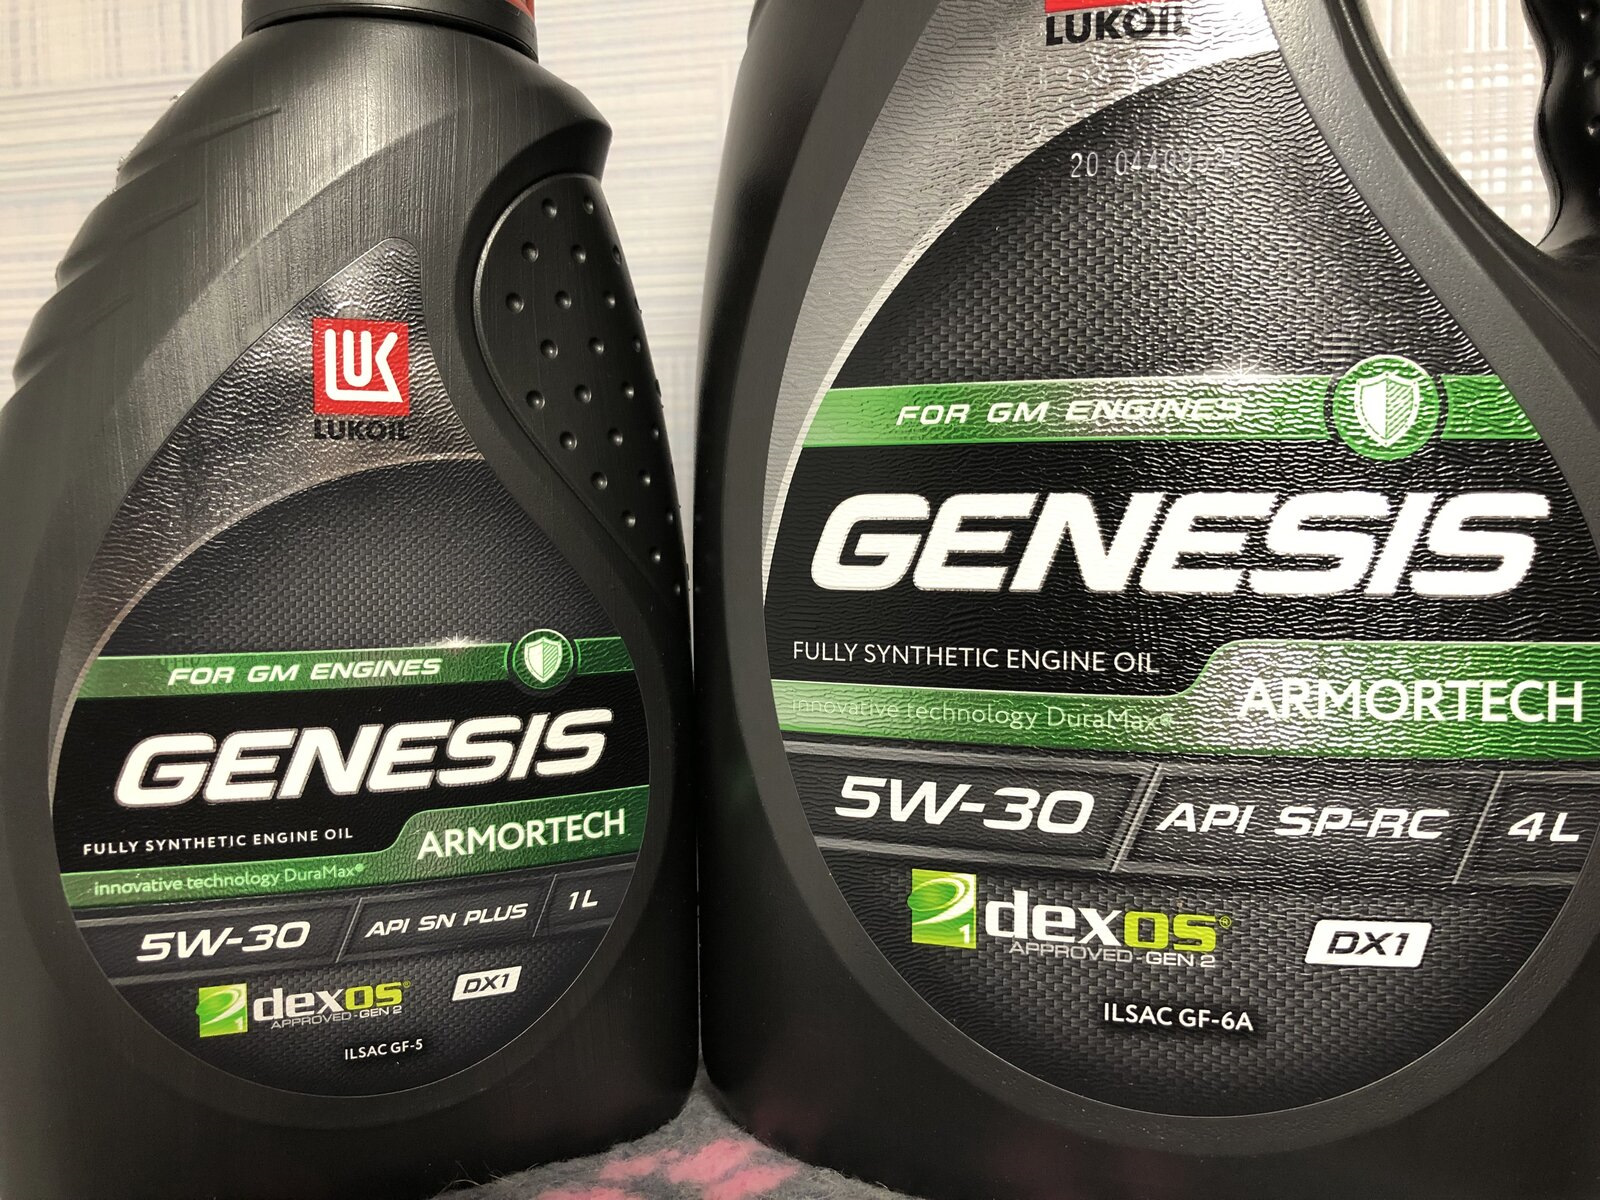 Масло лукойл dx1. Lukoil Genesis 5w30 dexos1. Genesis Armortech dx1 5w-30. Лукойл Genesis Armortech dx1 5w-30. Dexos1 gen2 Лукойл Genesis dx1 5w-30.